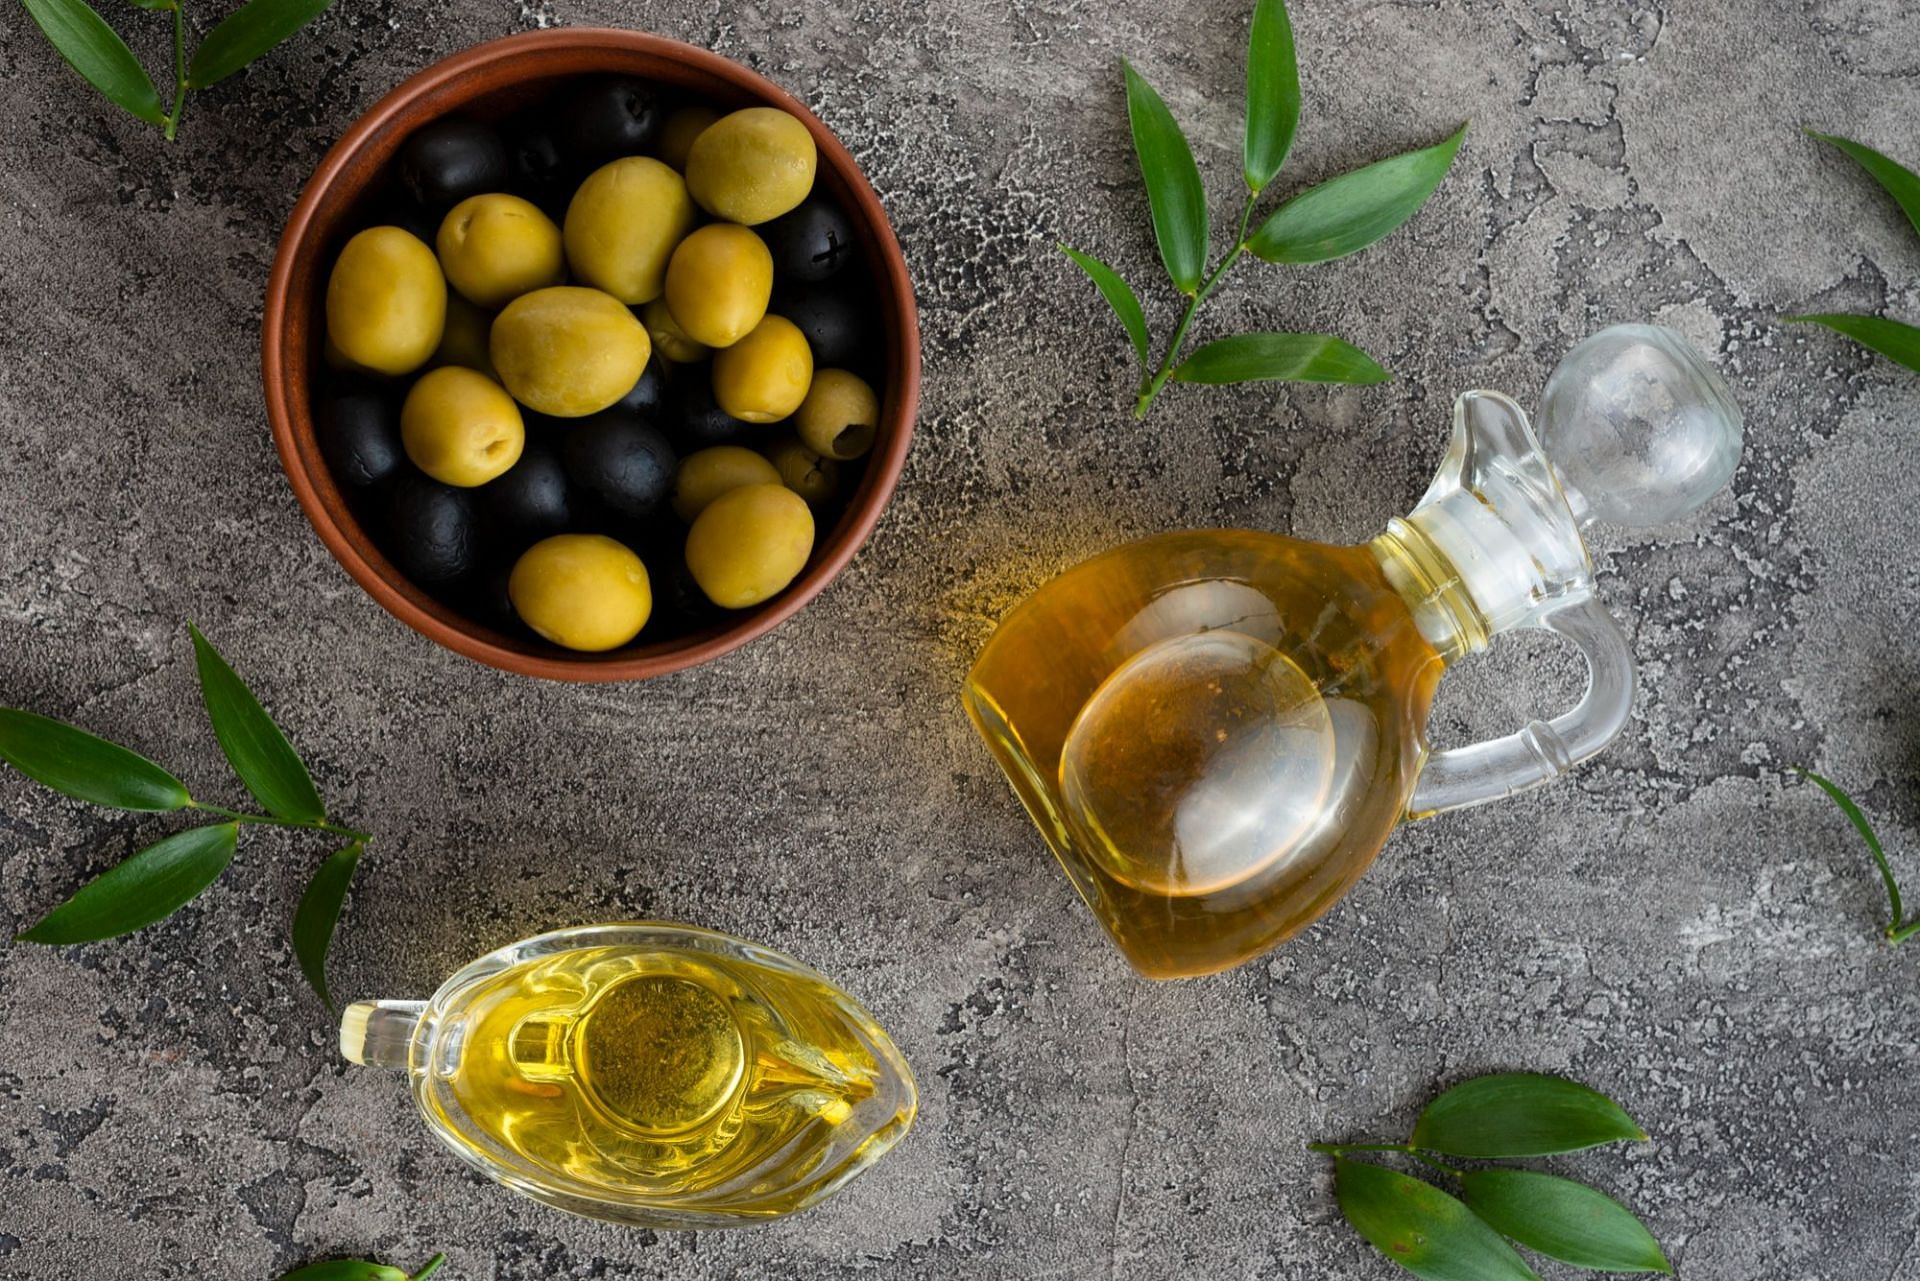 What is the real difference difference between extra virgin and normal olive oil? (Image by Freepik)